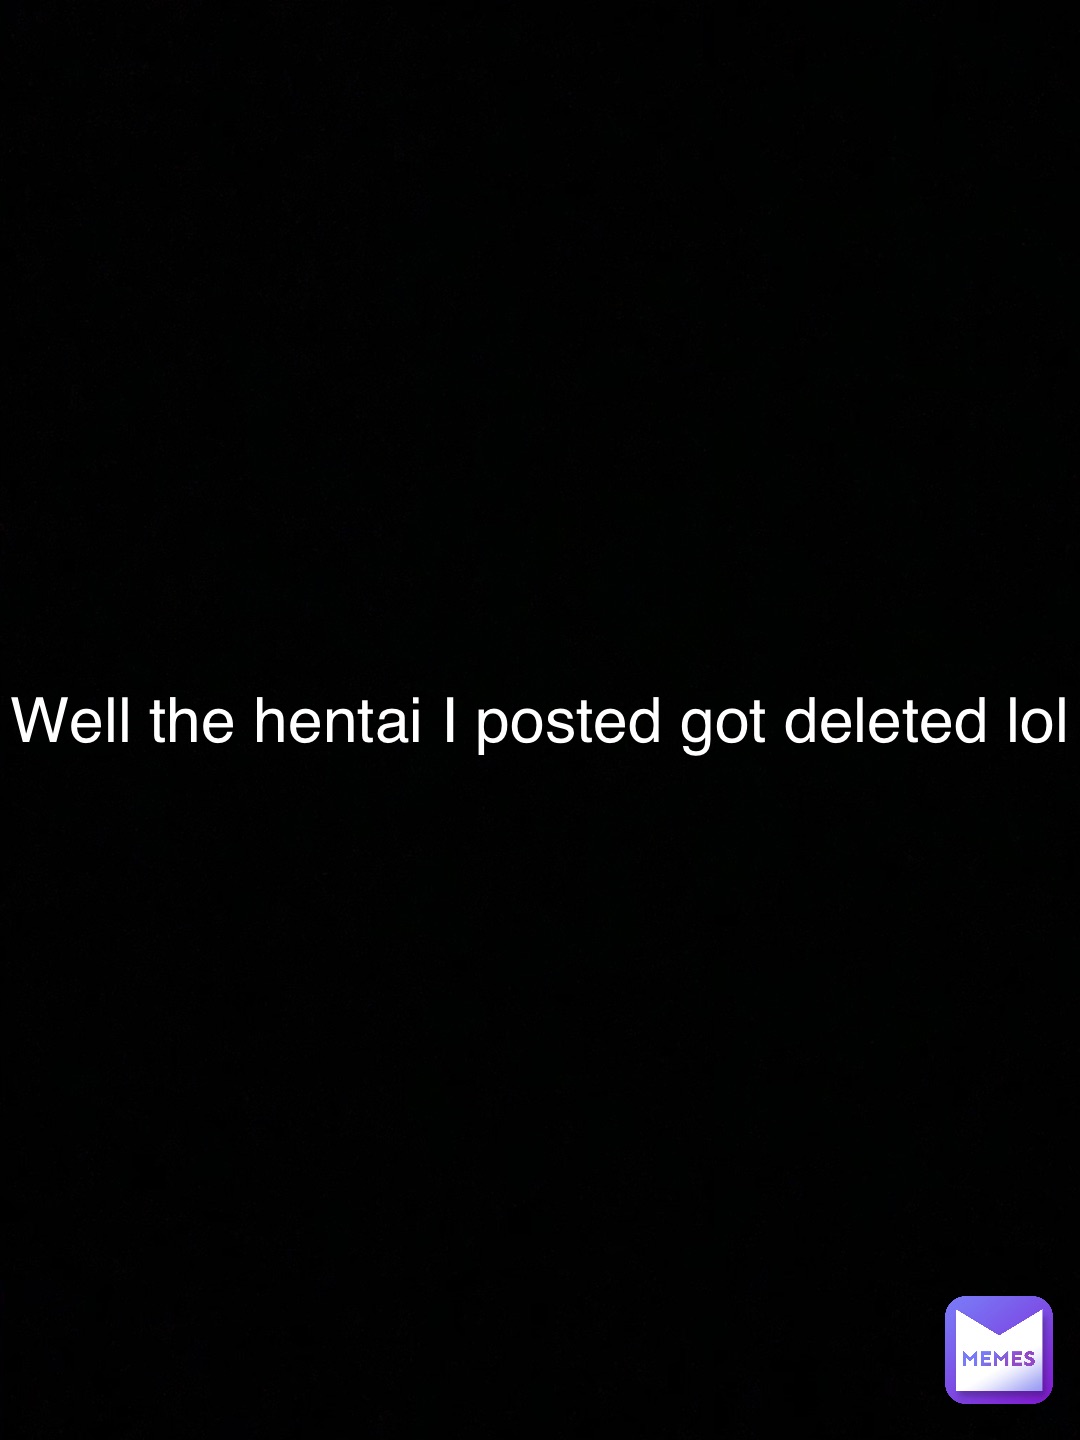 Well the hentai I posted got deleted lol